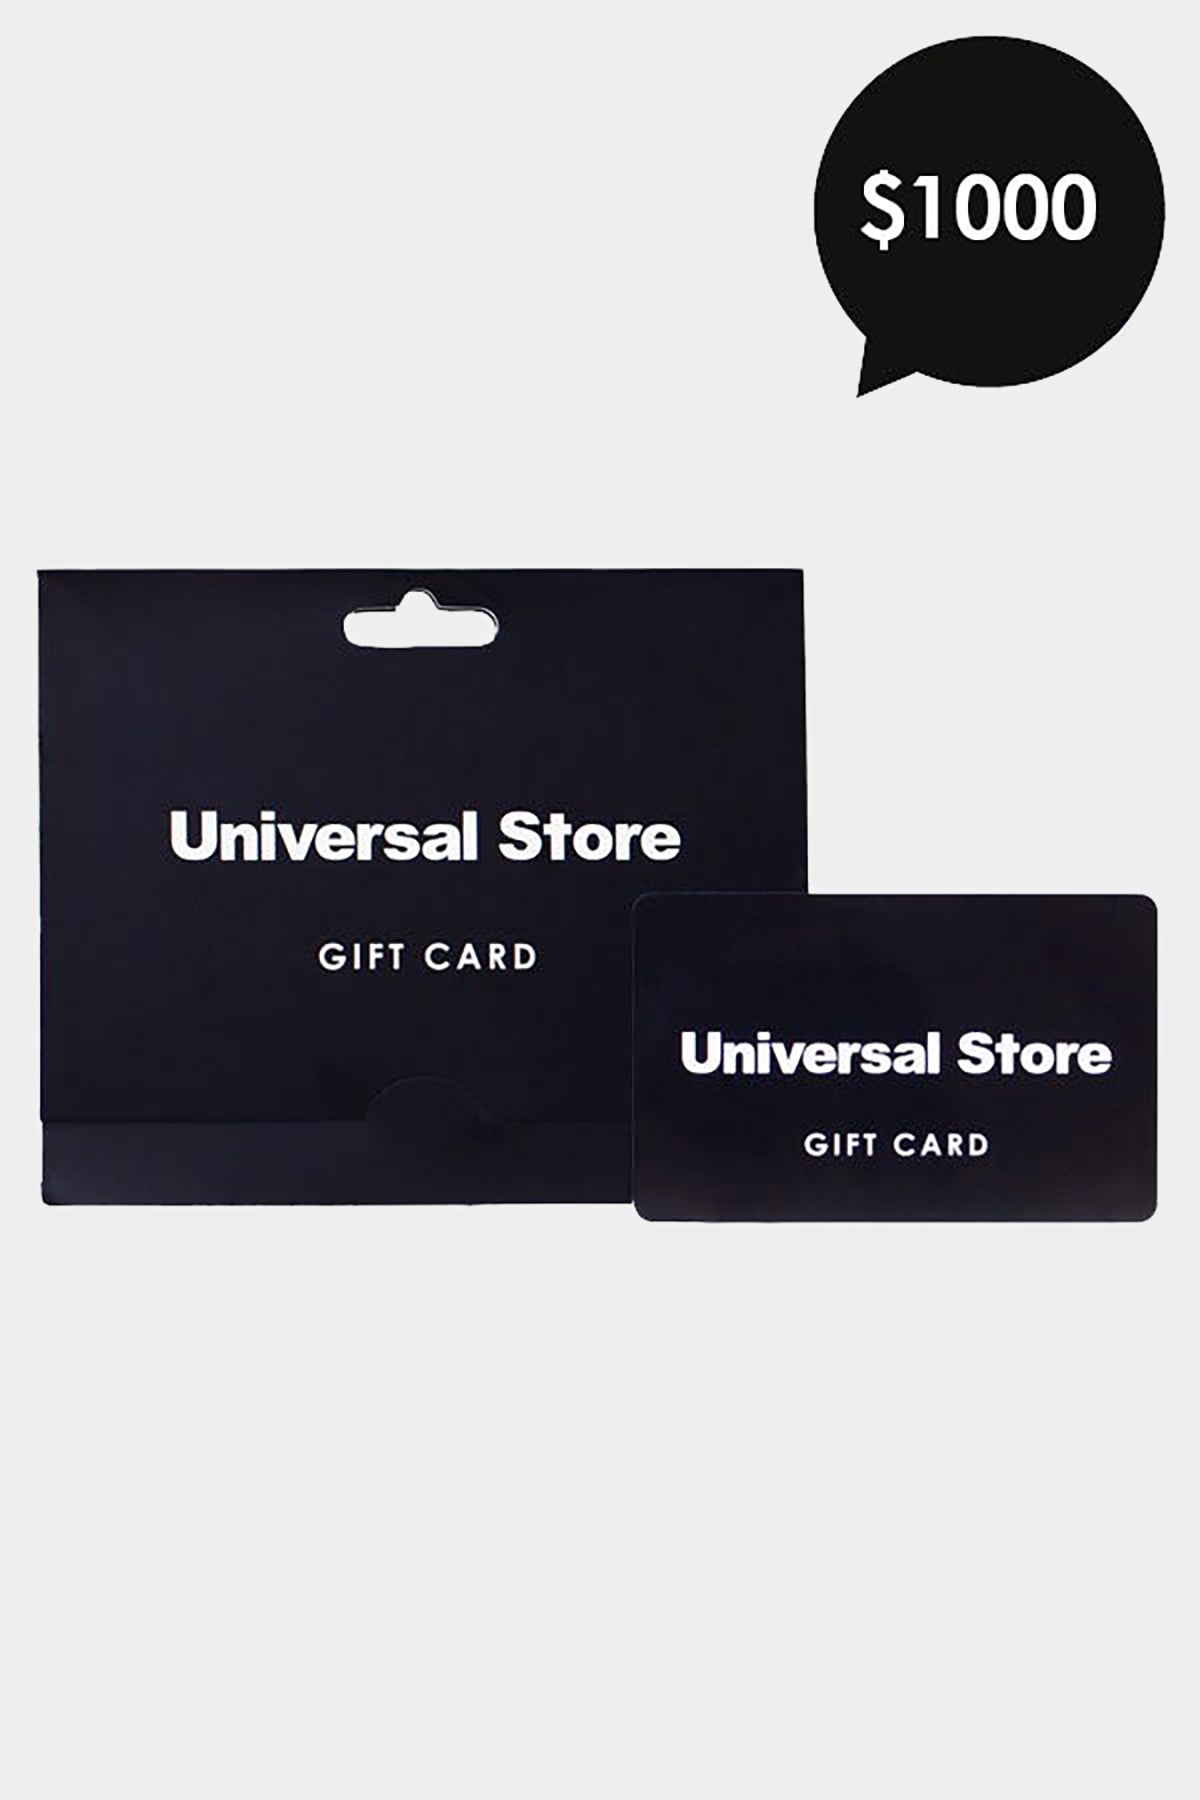 Universal Store $1000 Gift Card